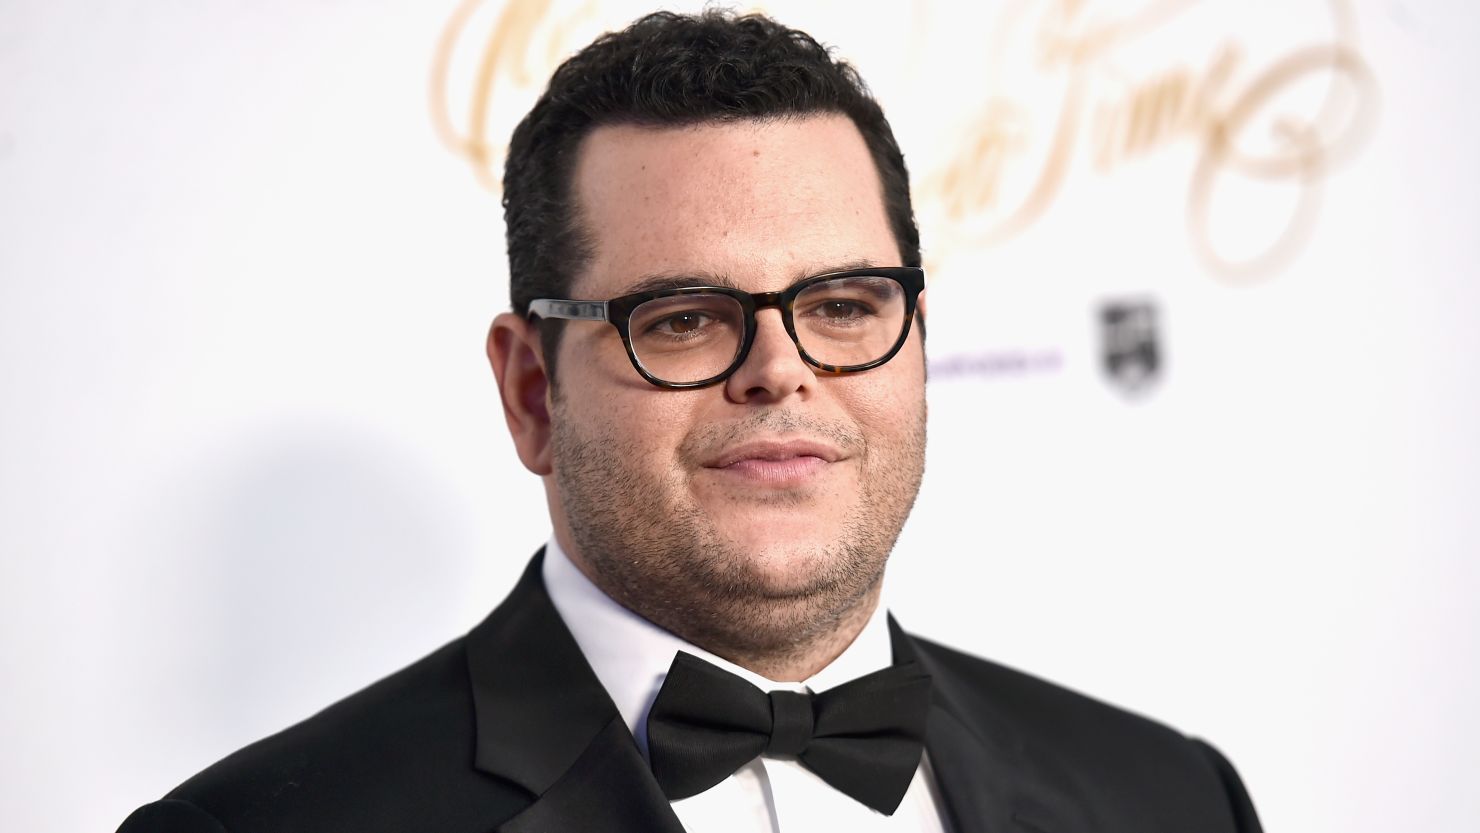 Actor Josh Gad attends the 2016 Children's Hospital Los Angeles "Once Upon a Time" Gala at L.A. Live Event Deck on October 15, 2016 in Los Angeles, California.